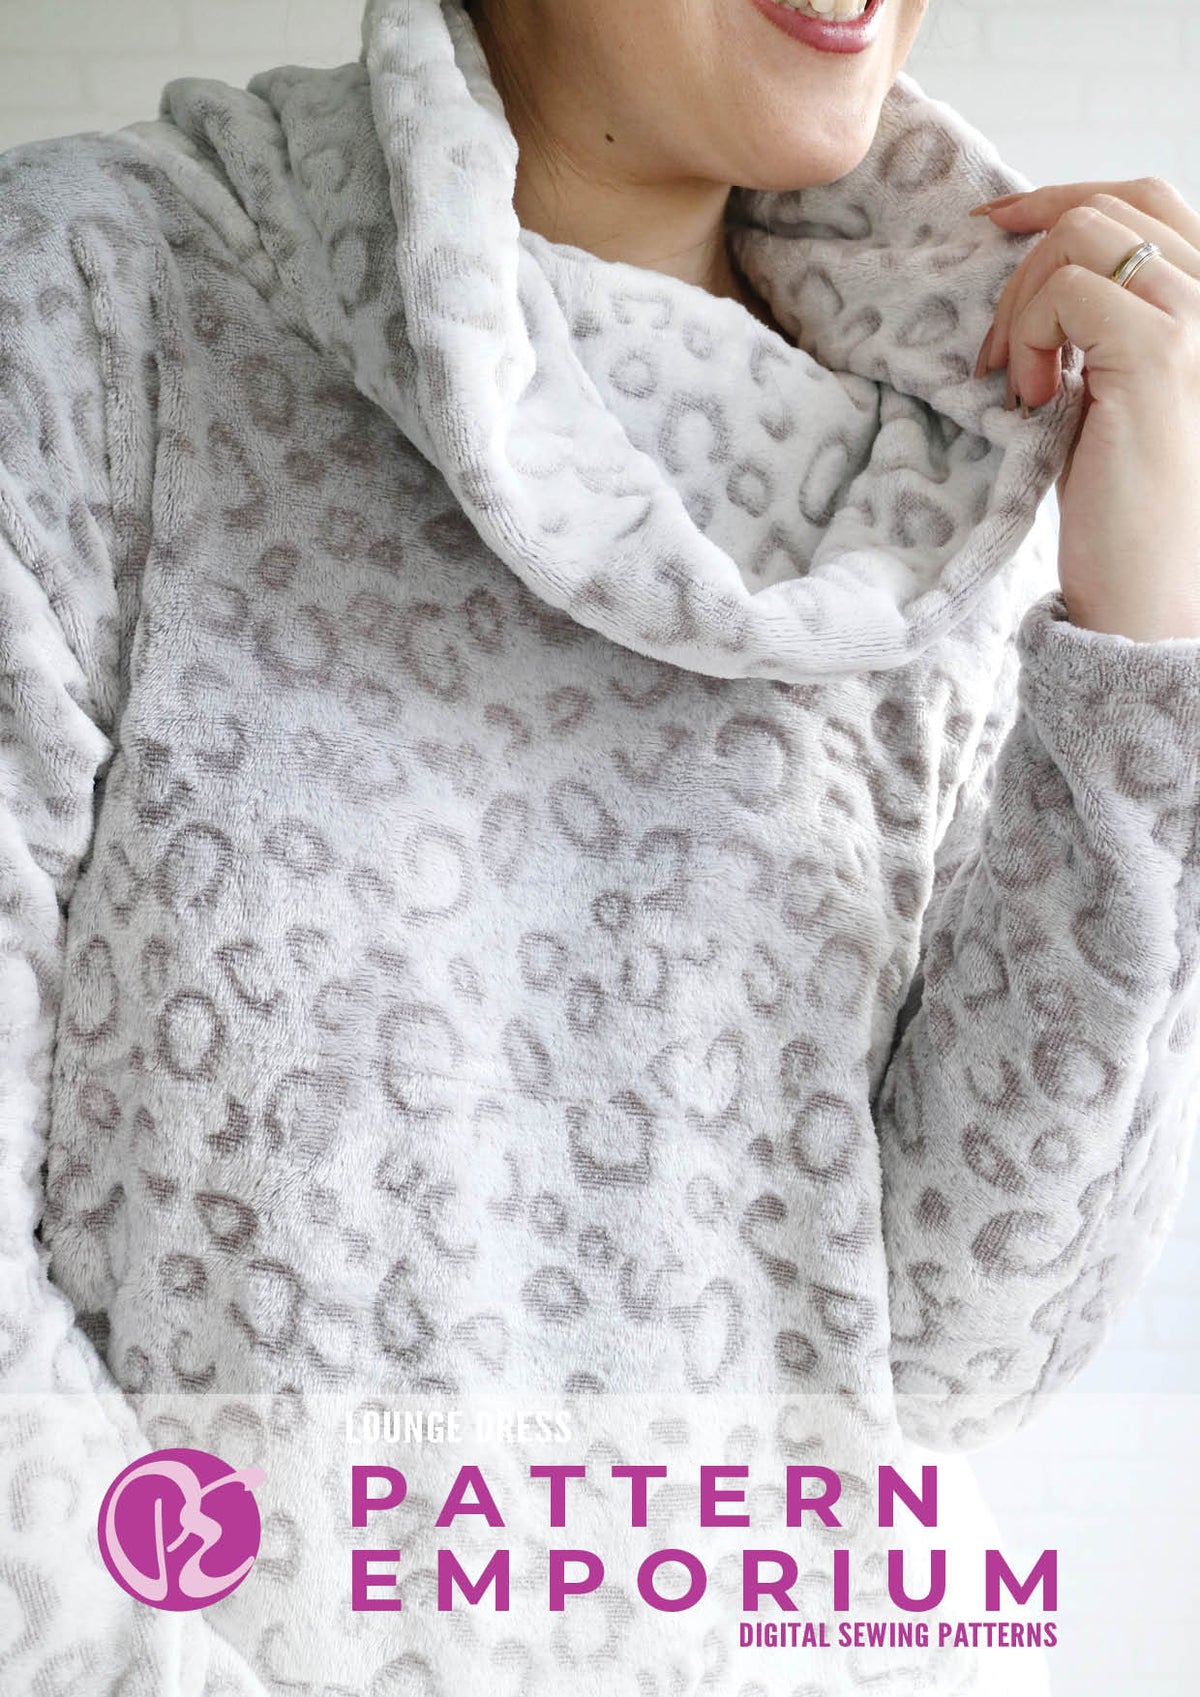 10 popular fabrics for sewing loungewear, casual dresses and tops - SewGuide